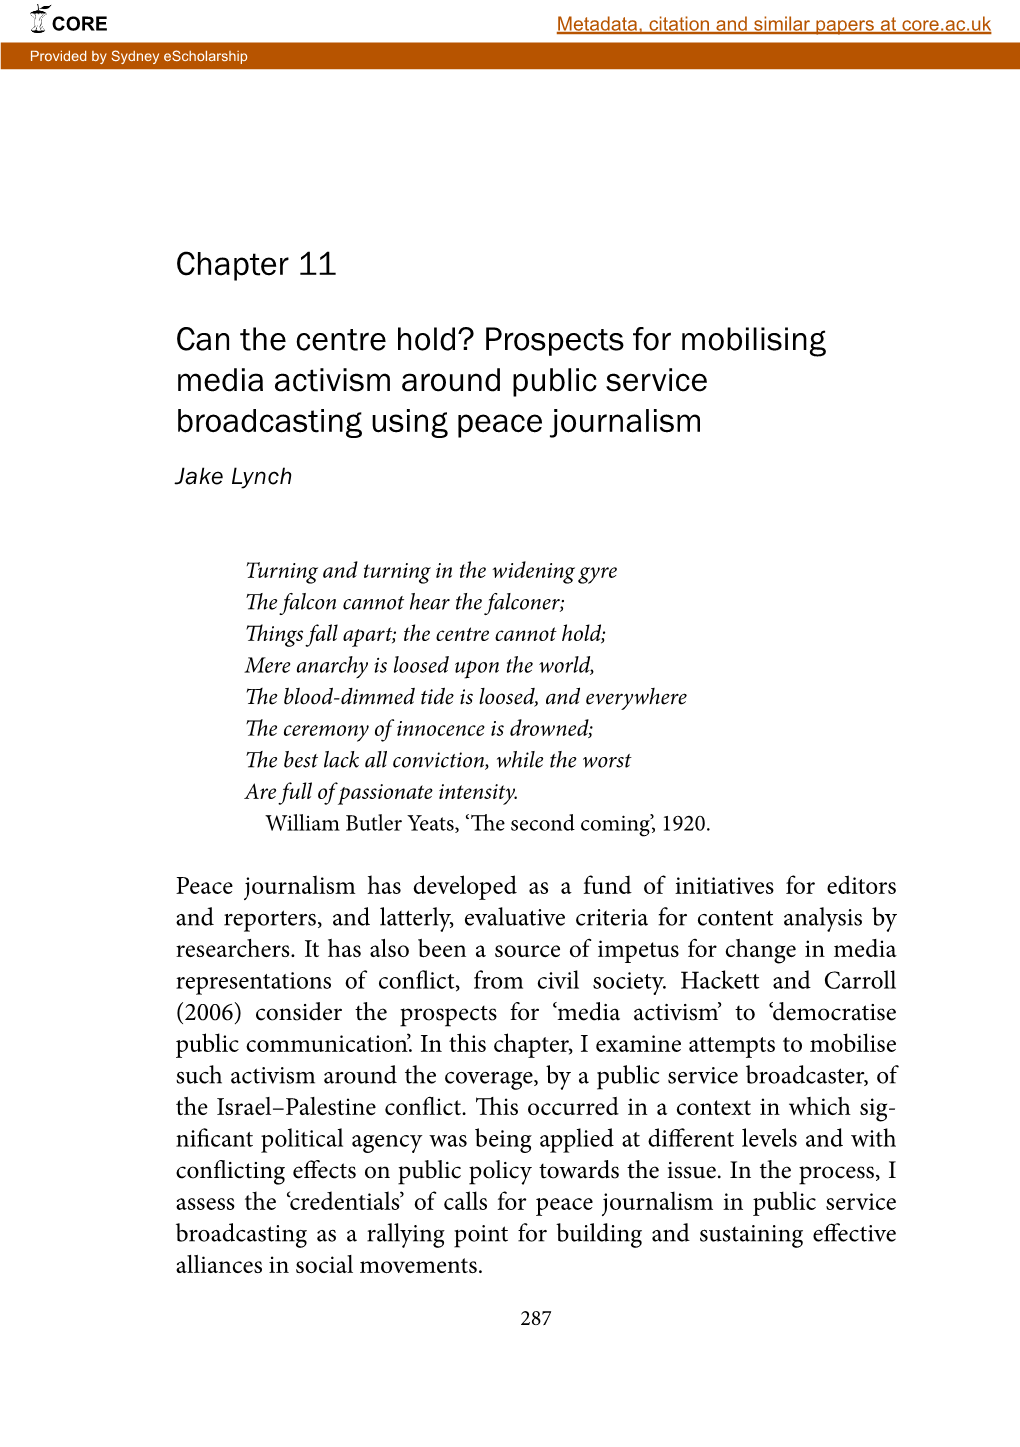 Chapter 11 Can the Centre Hold? Prospects for Mobilising Media